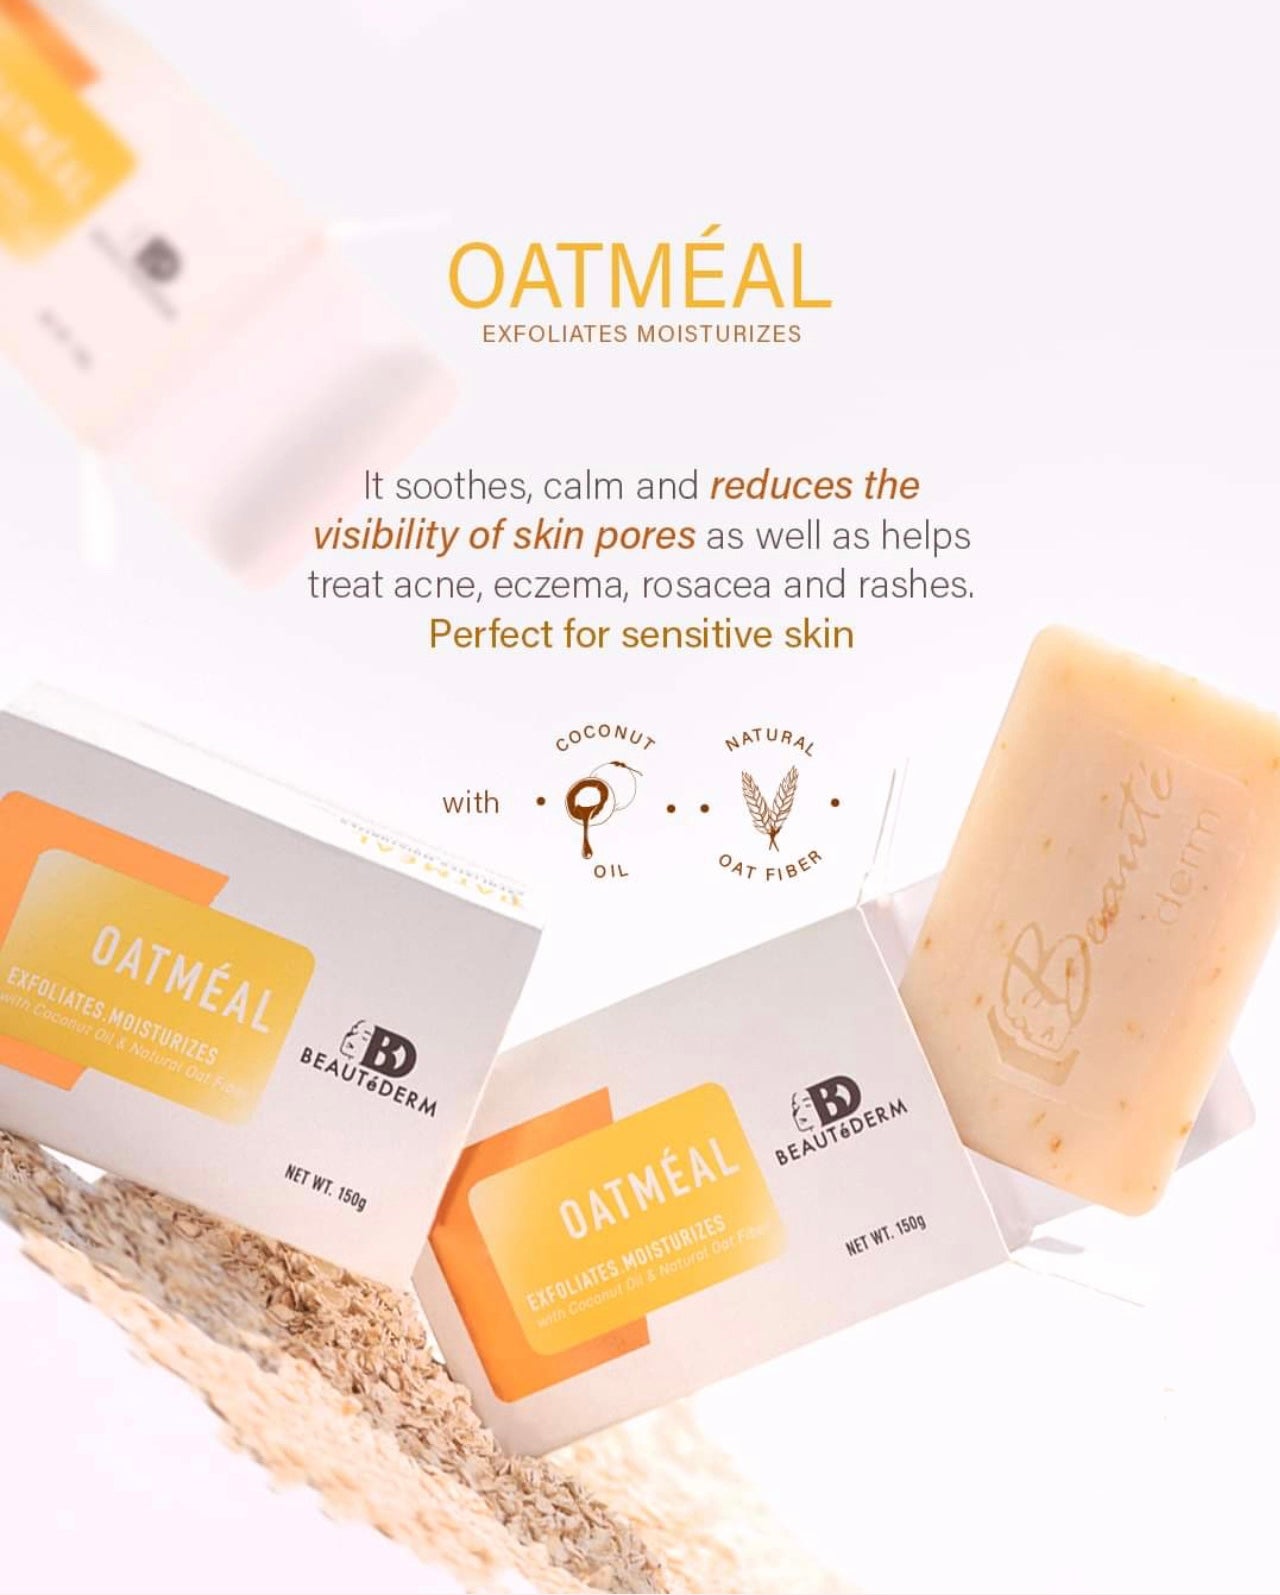 Oatmeal Soap 150 grams BUY 1 GET 1 FREE FOR $17